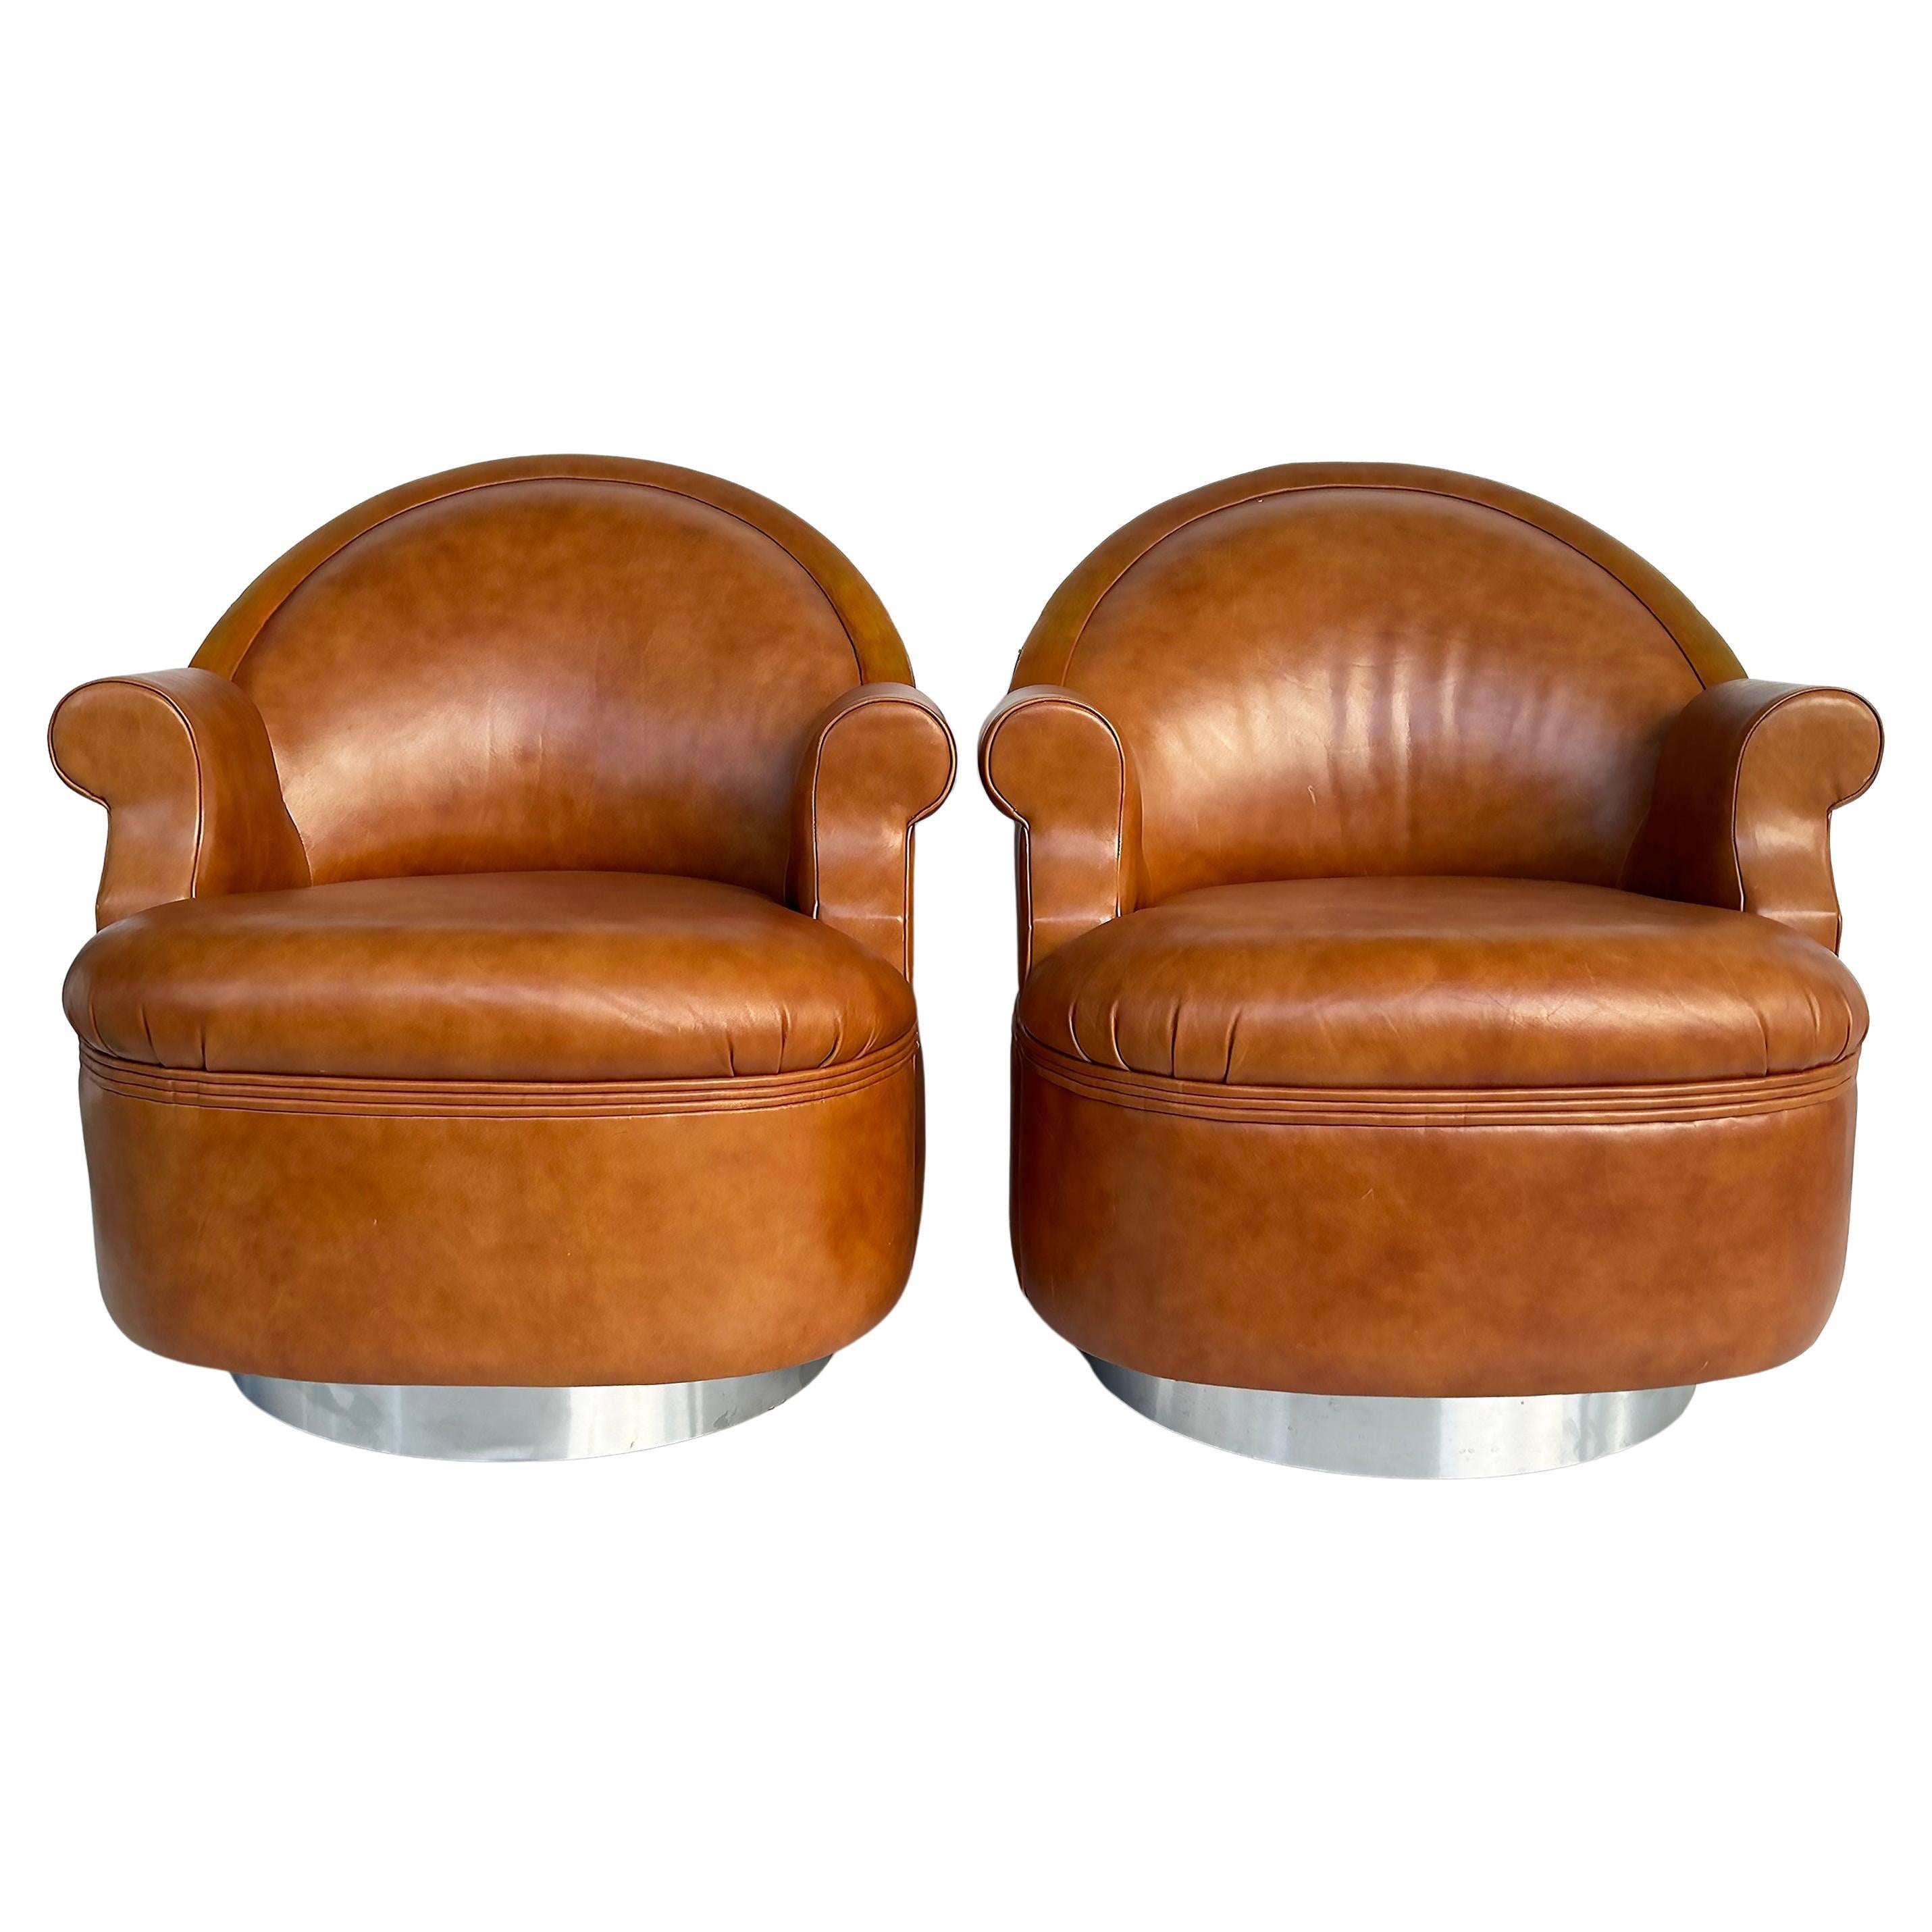  Steve Chase Martin Brattrud Chrome Leather Swivel Chairs on Casters- A Pair For Sale